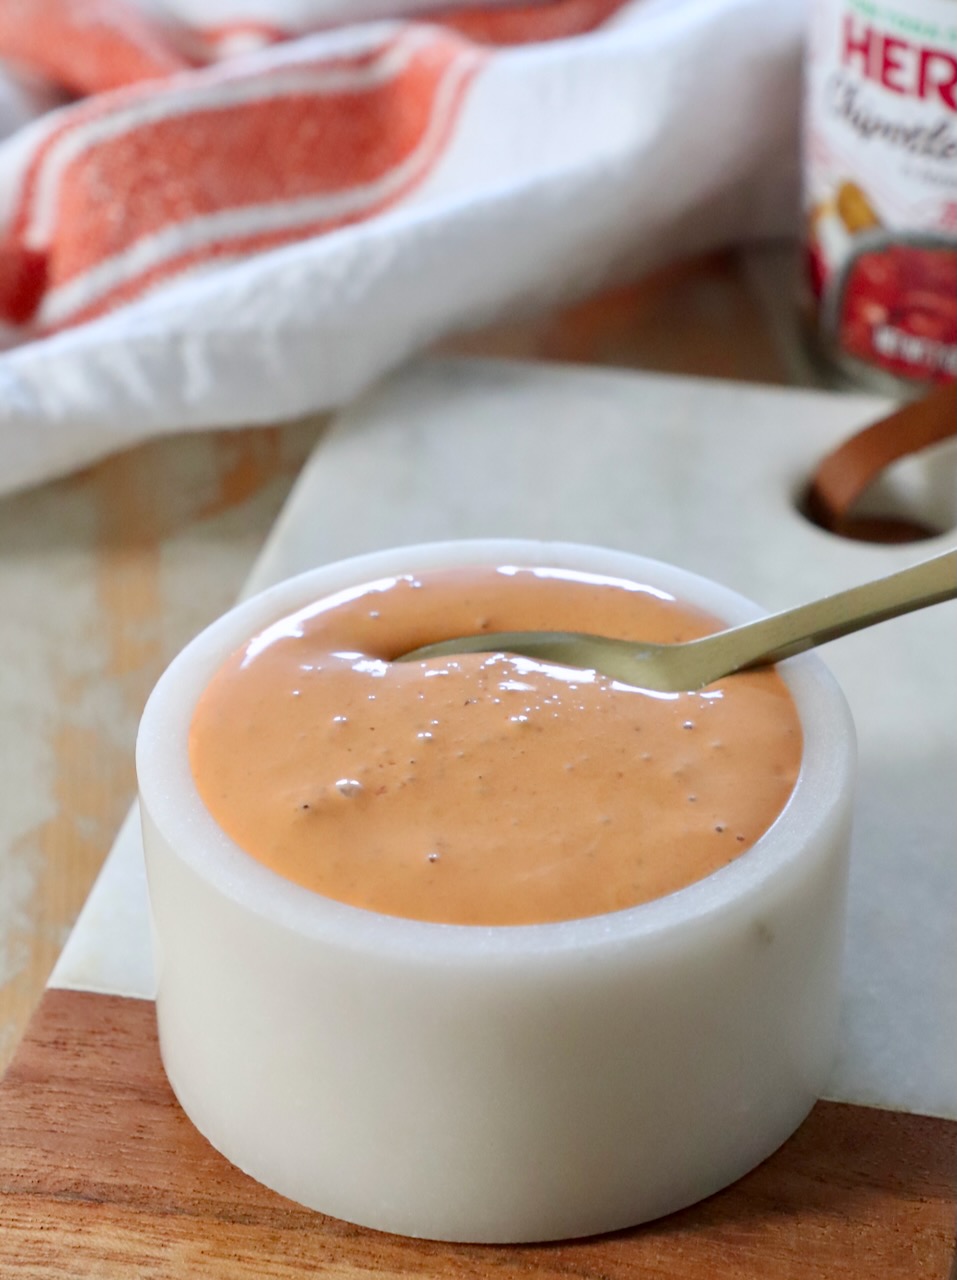 chipotle sauce in bowl with spoon